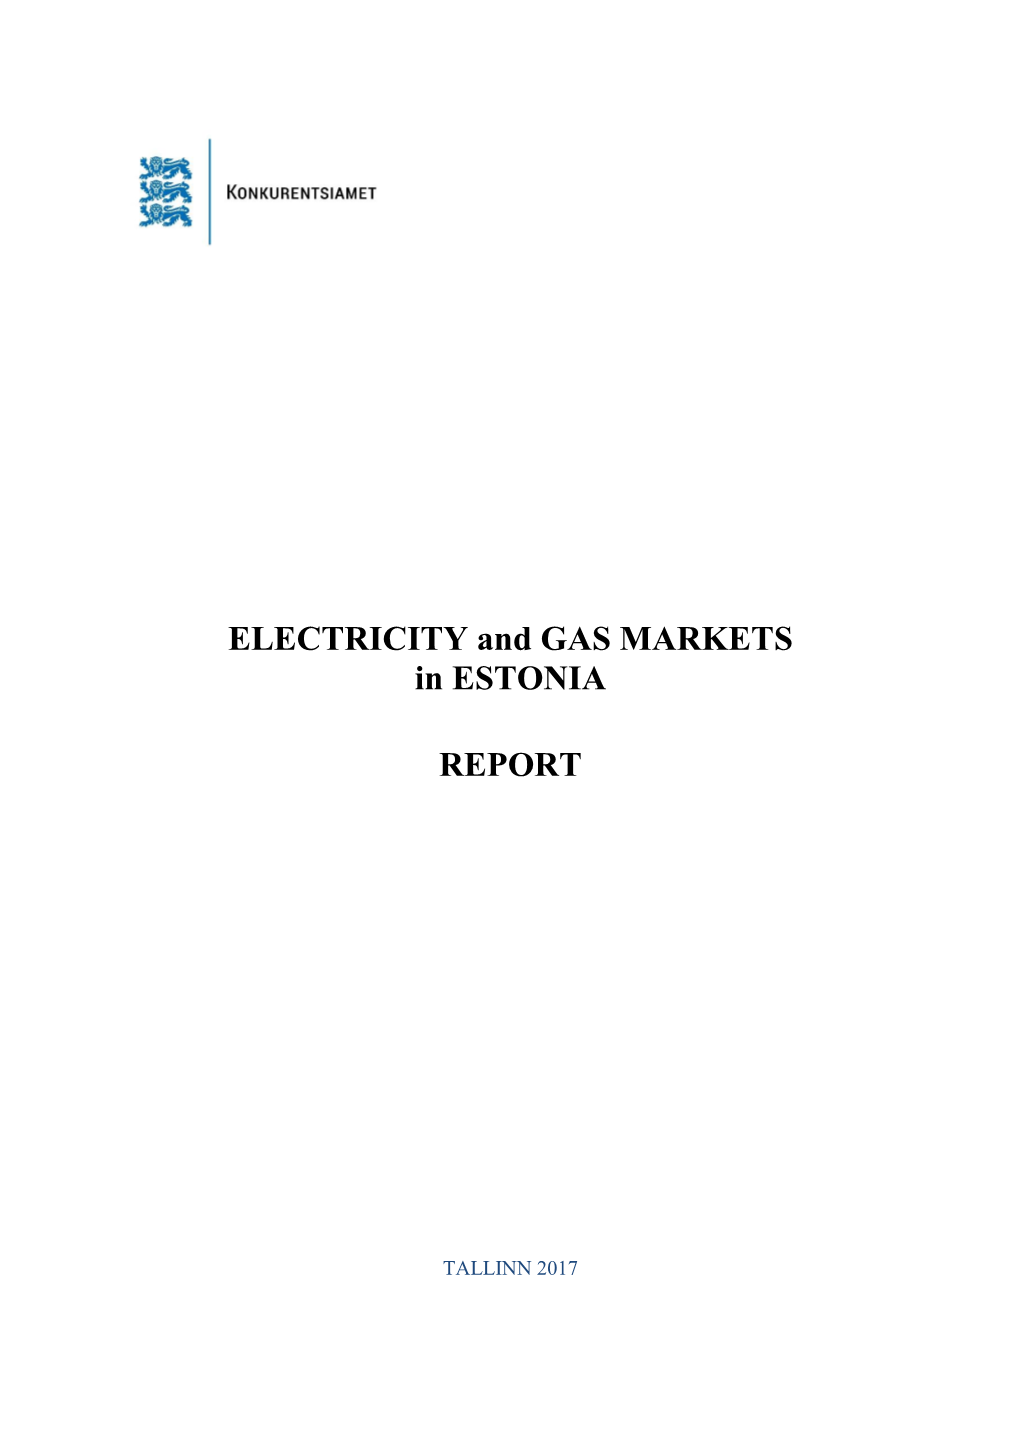 ELECTRICITY and GAS MARKETS in ESTONIA REPORT